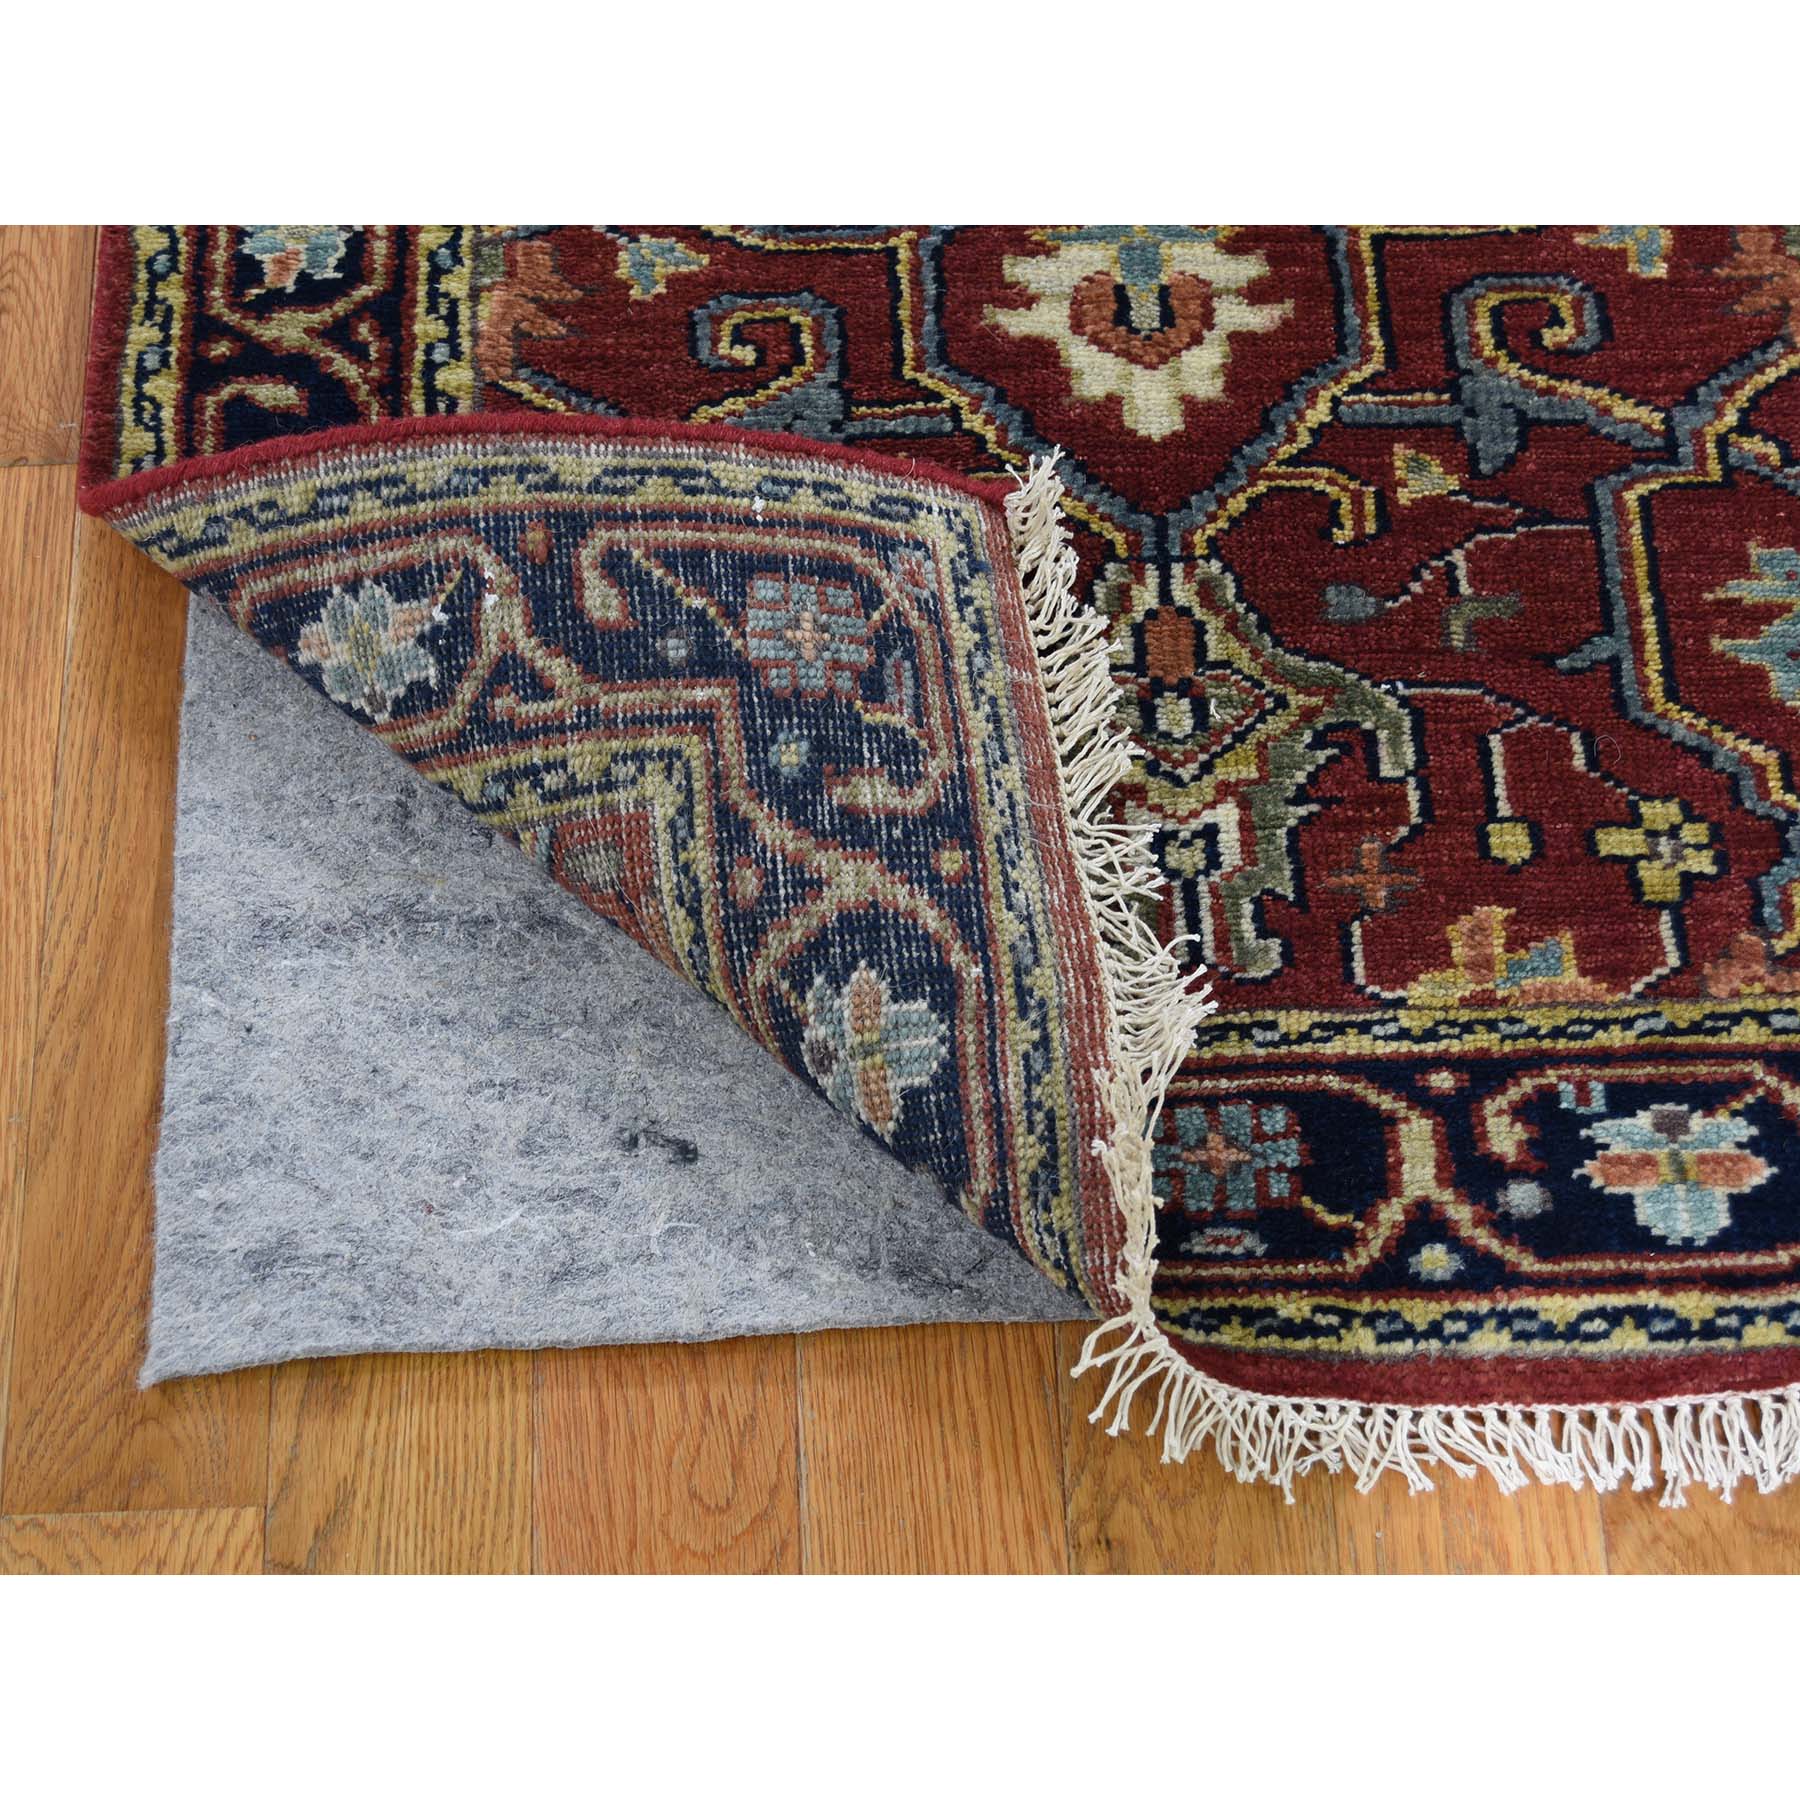 2-7 x9-8  Red Heriz Revival Pure Wool Hand-Knotted Oriental Runner Rug 